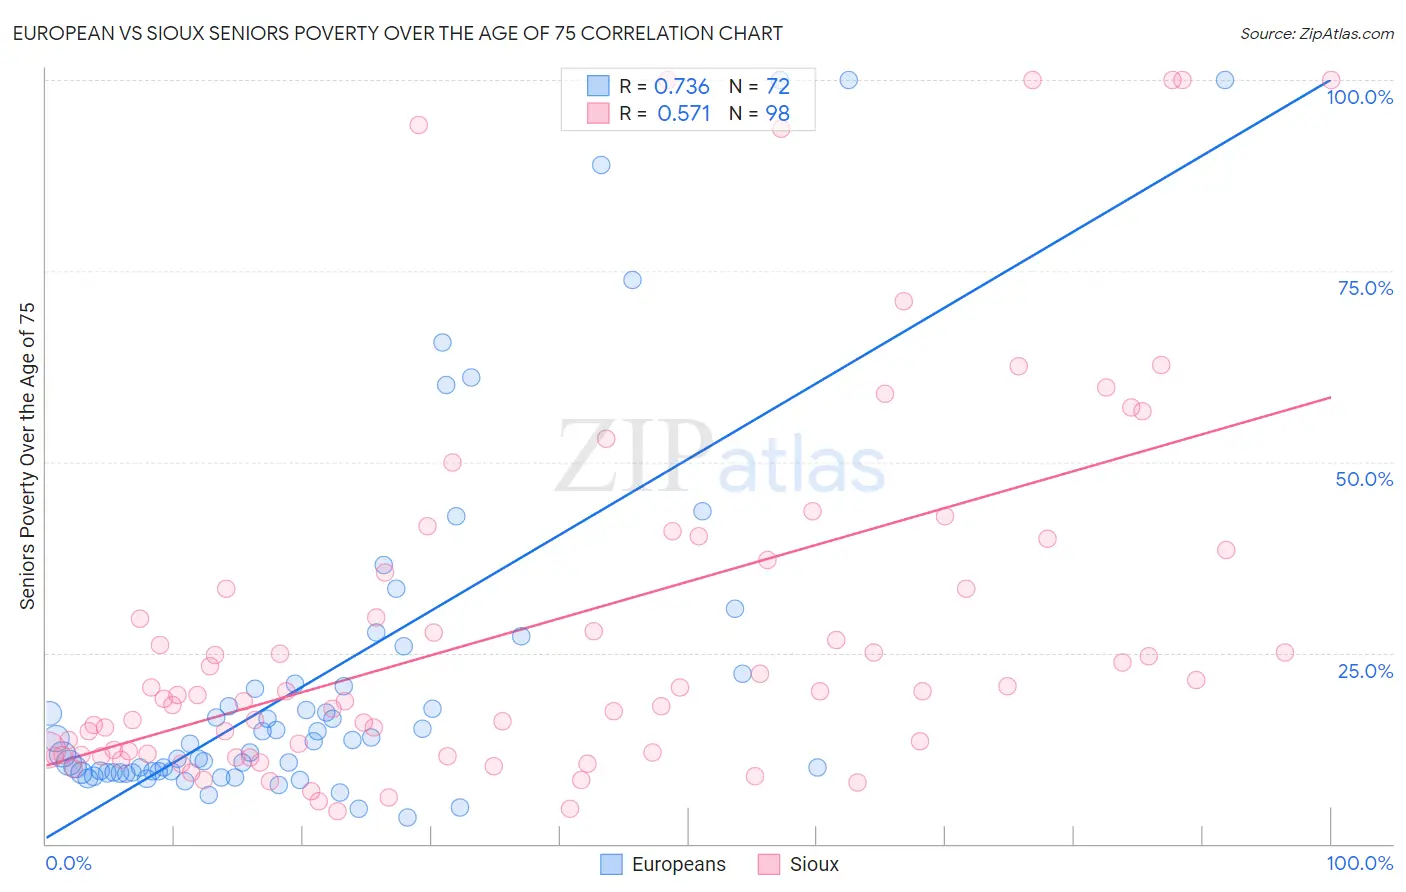 European vs Sioux Seniors Poverty Over the Age of 75